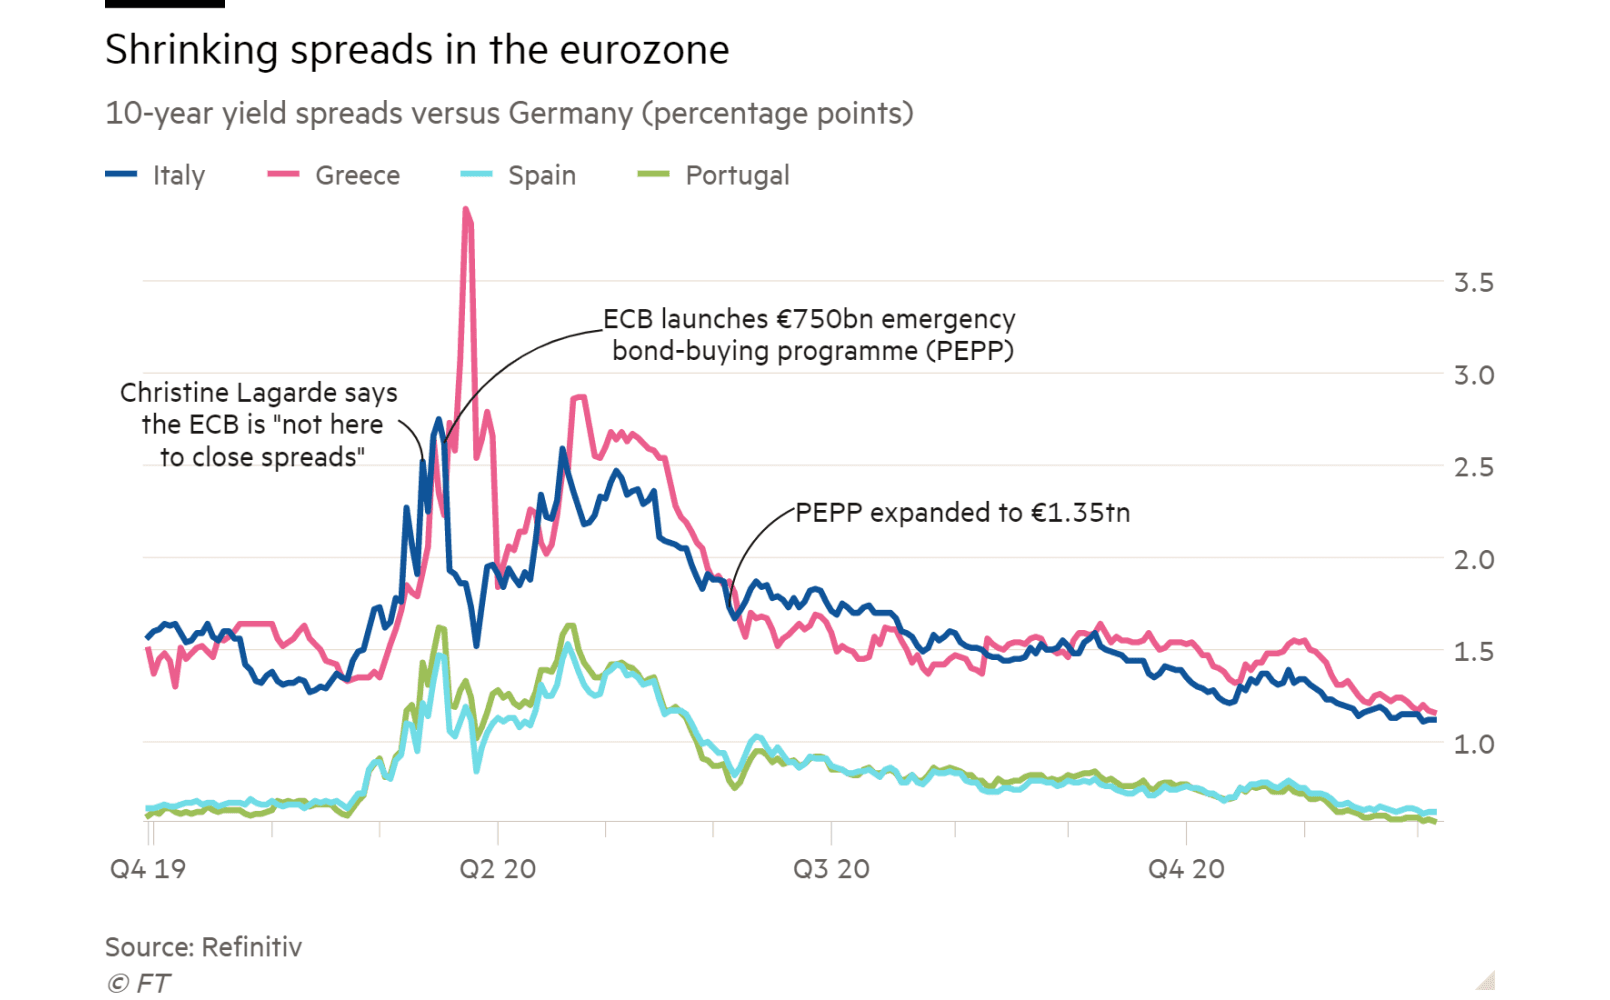 Shrinking spreads in the eurozone